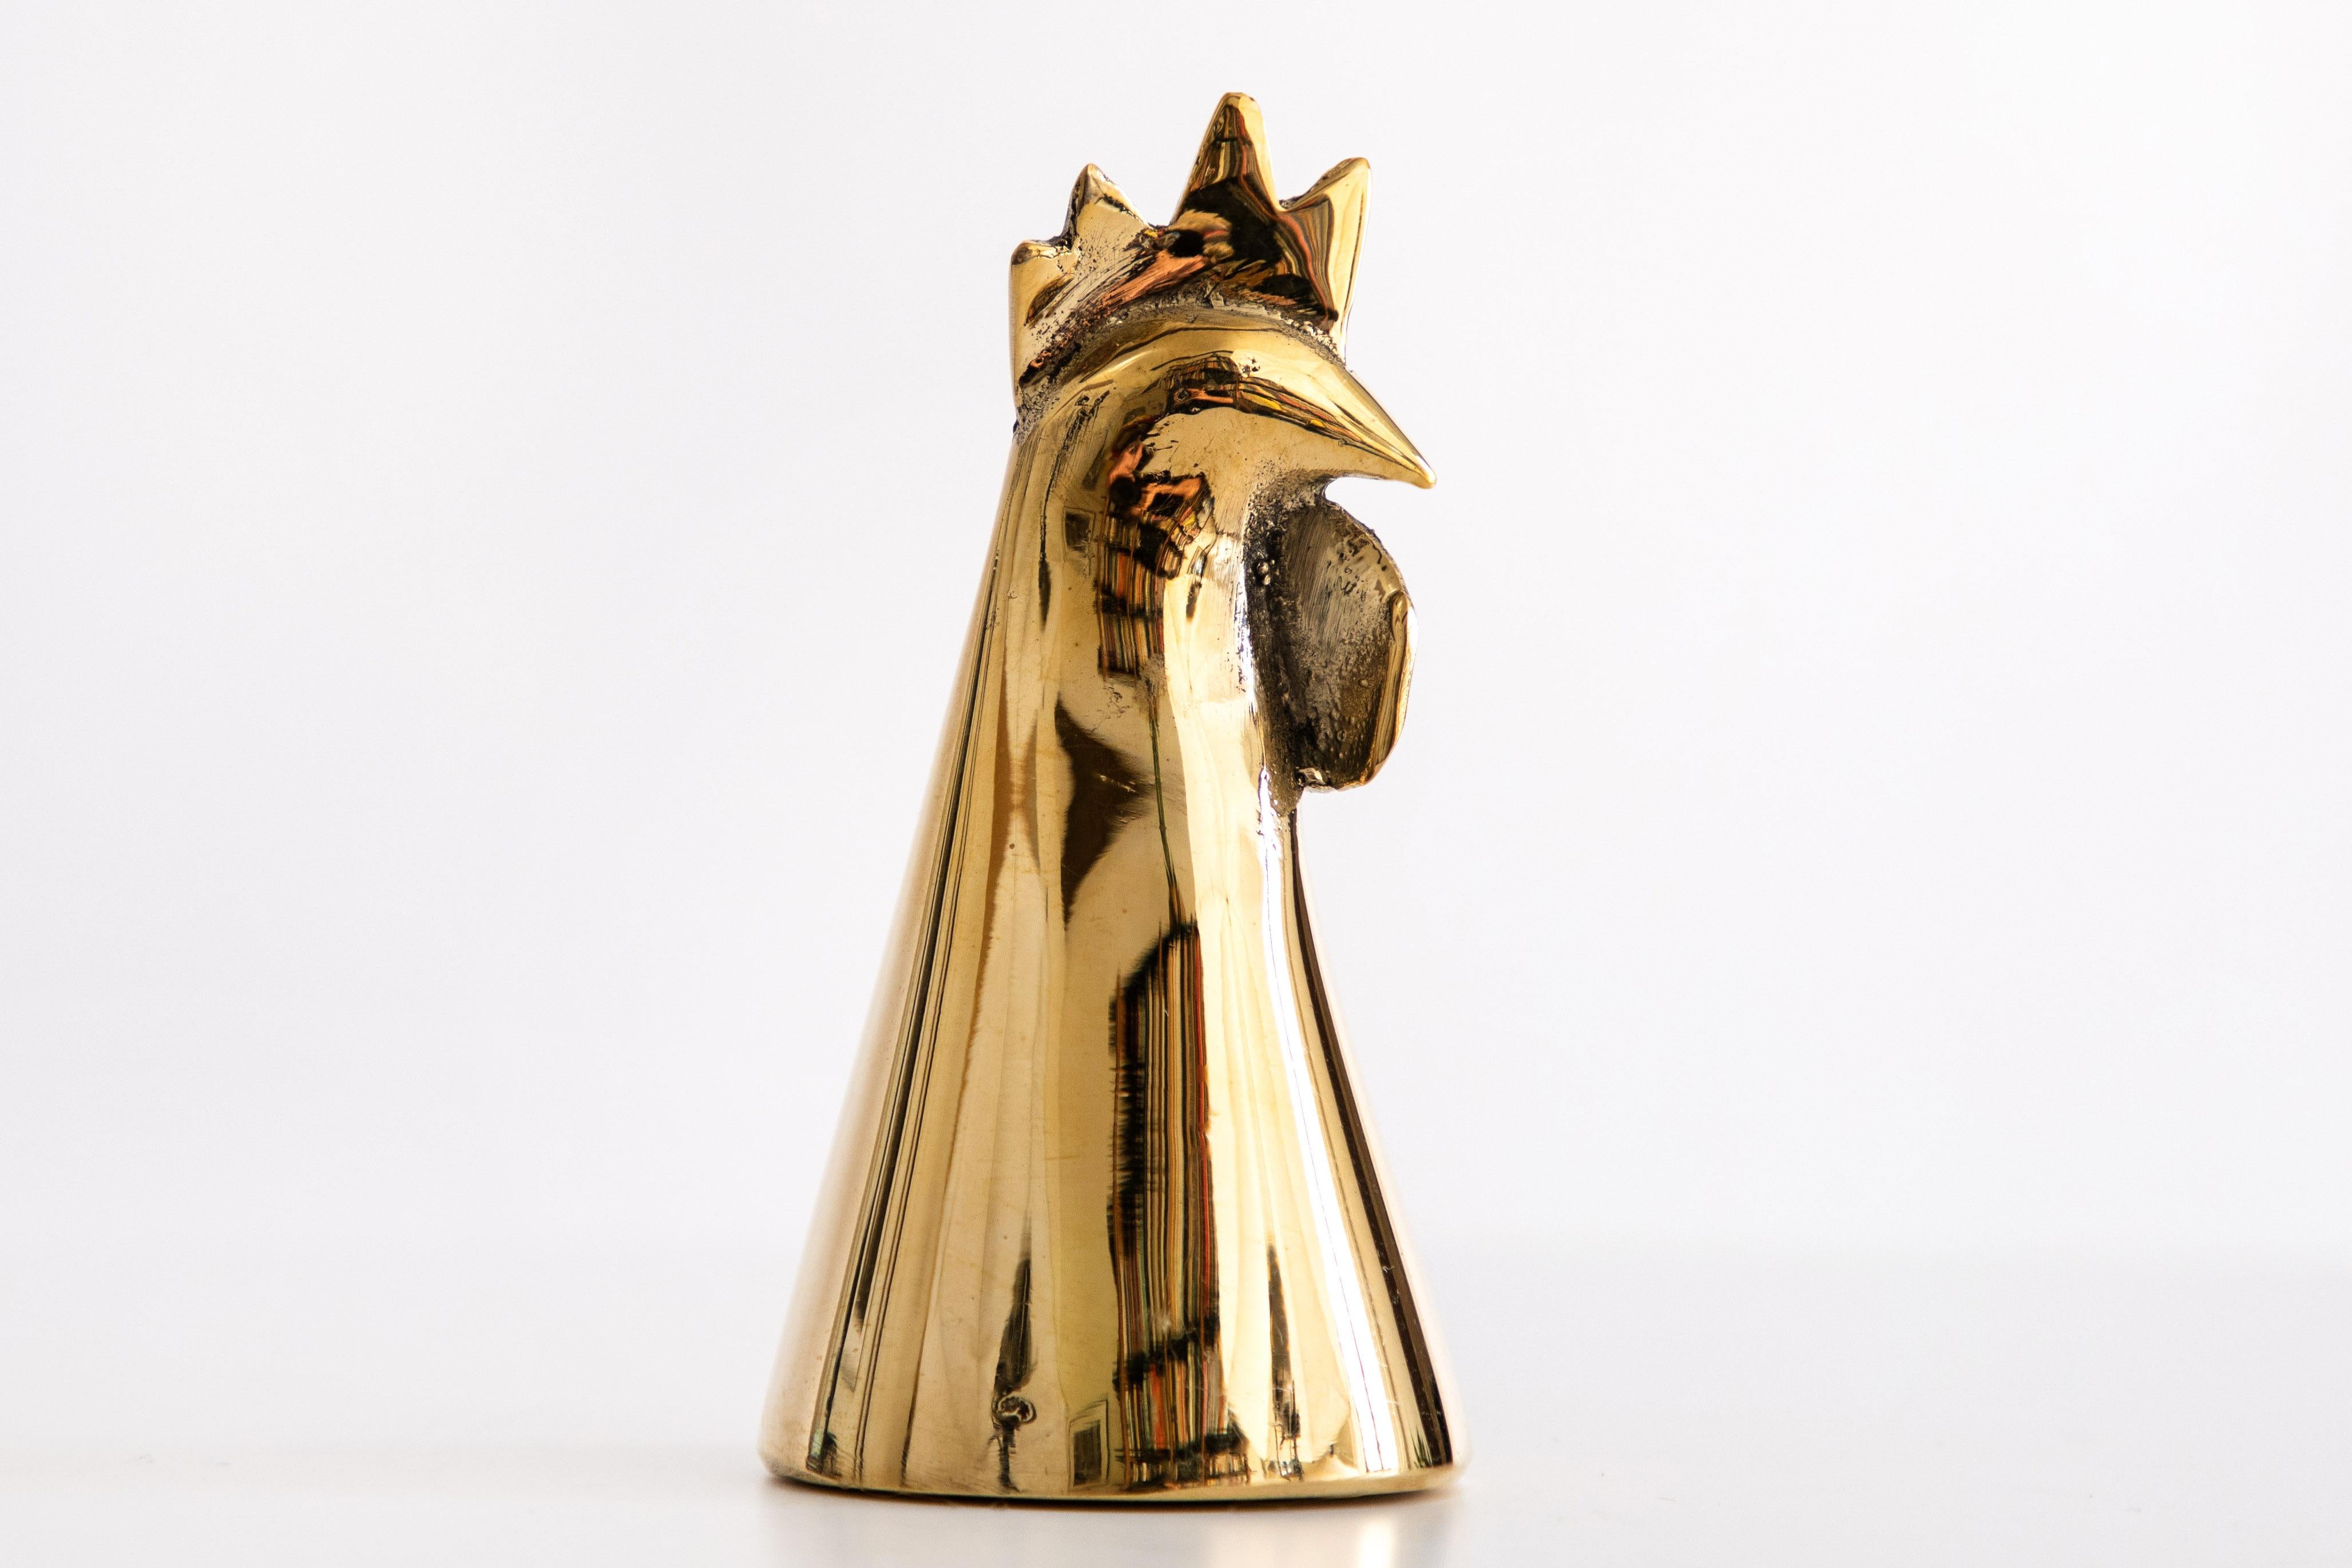 Carl Auböck model #4072/G 'Rooster' brass bell. Designed in the 1950s, this incredibly refined and sculptural bell is executed in polished brass. 

Price is per item. One in stock ready to ship. Available in unlimited quantities. Out of stock lead